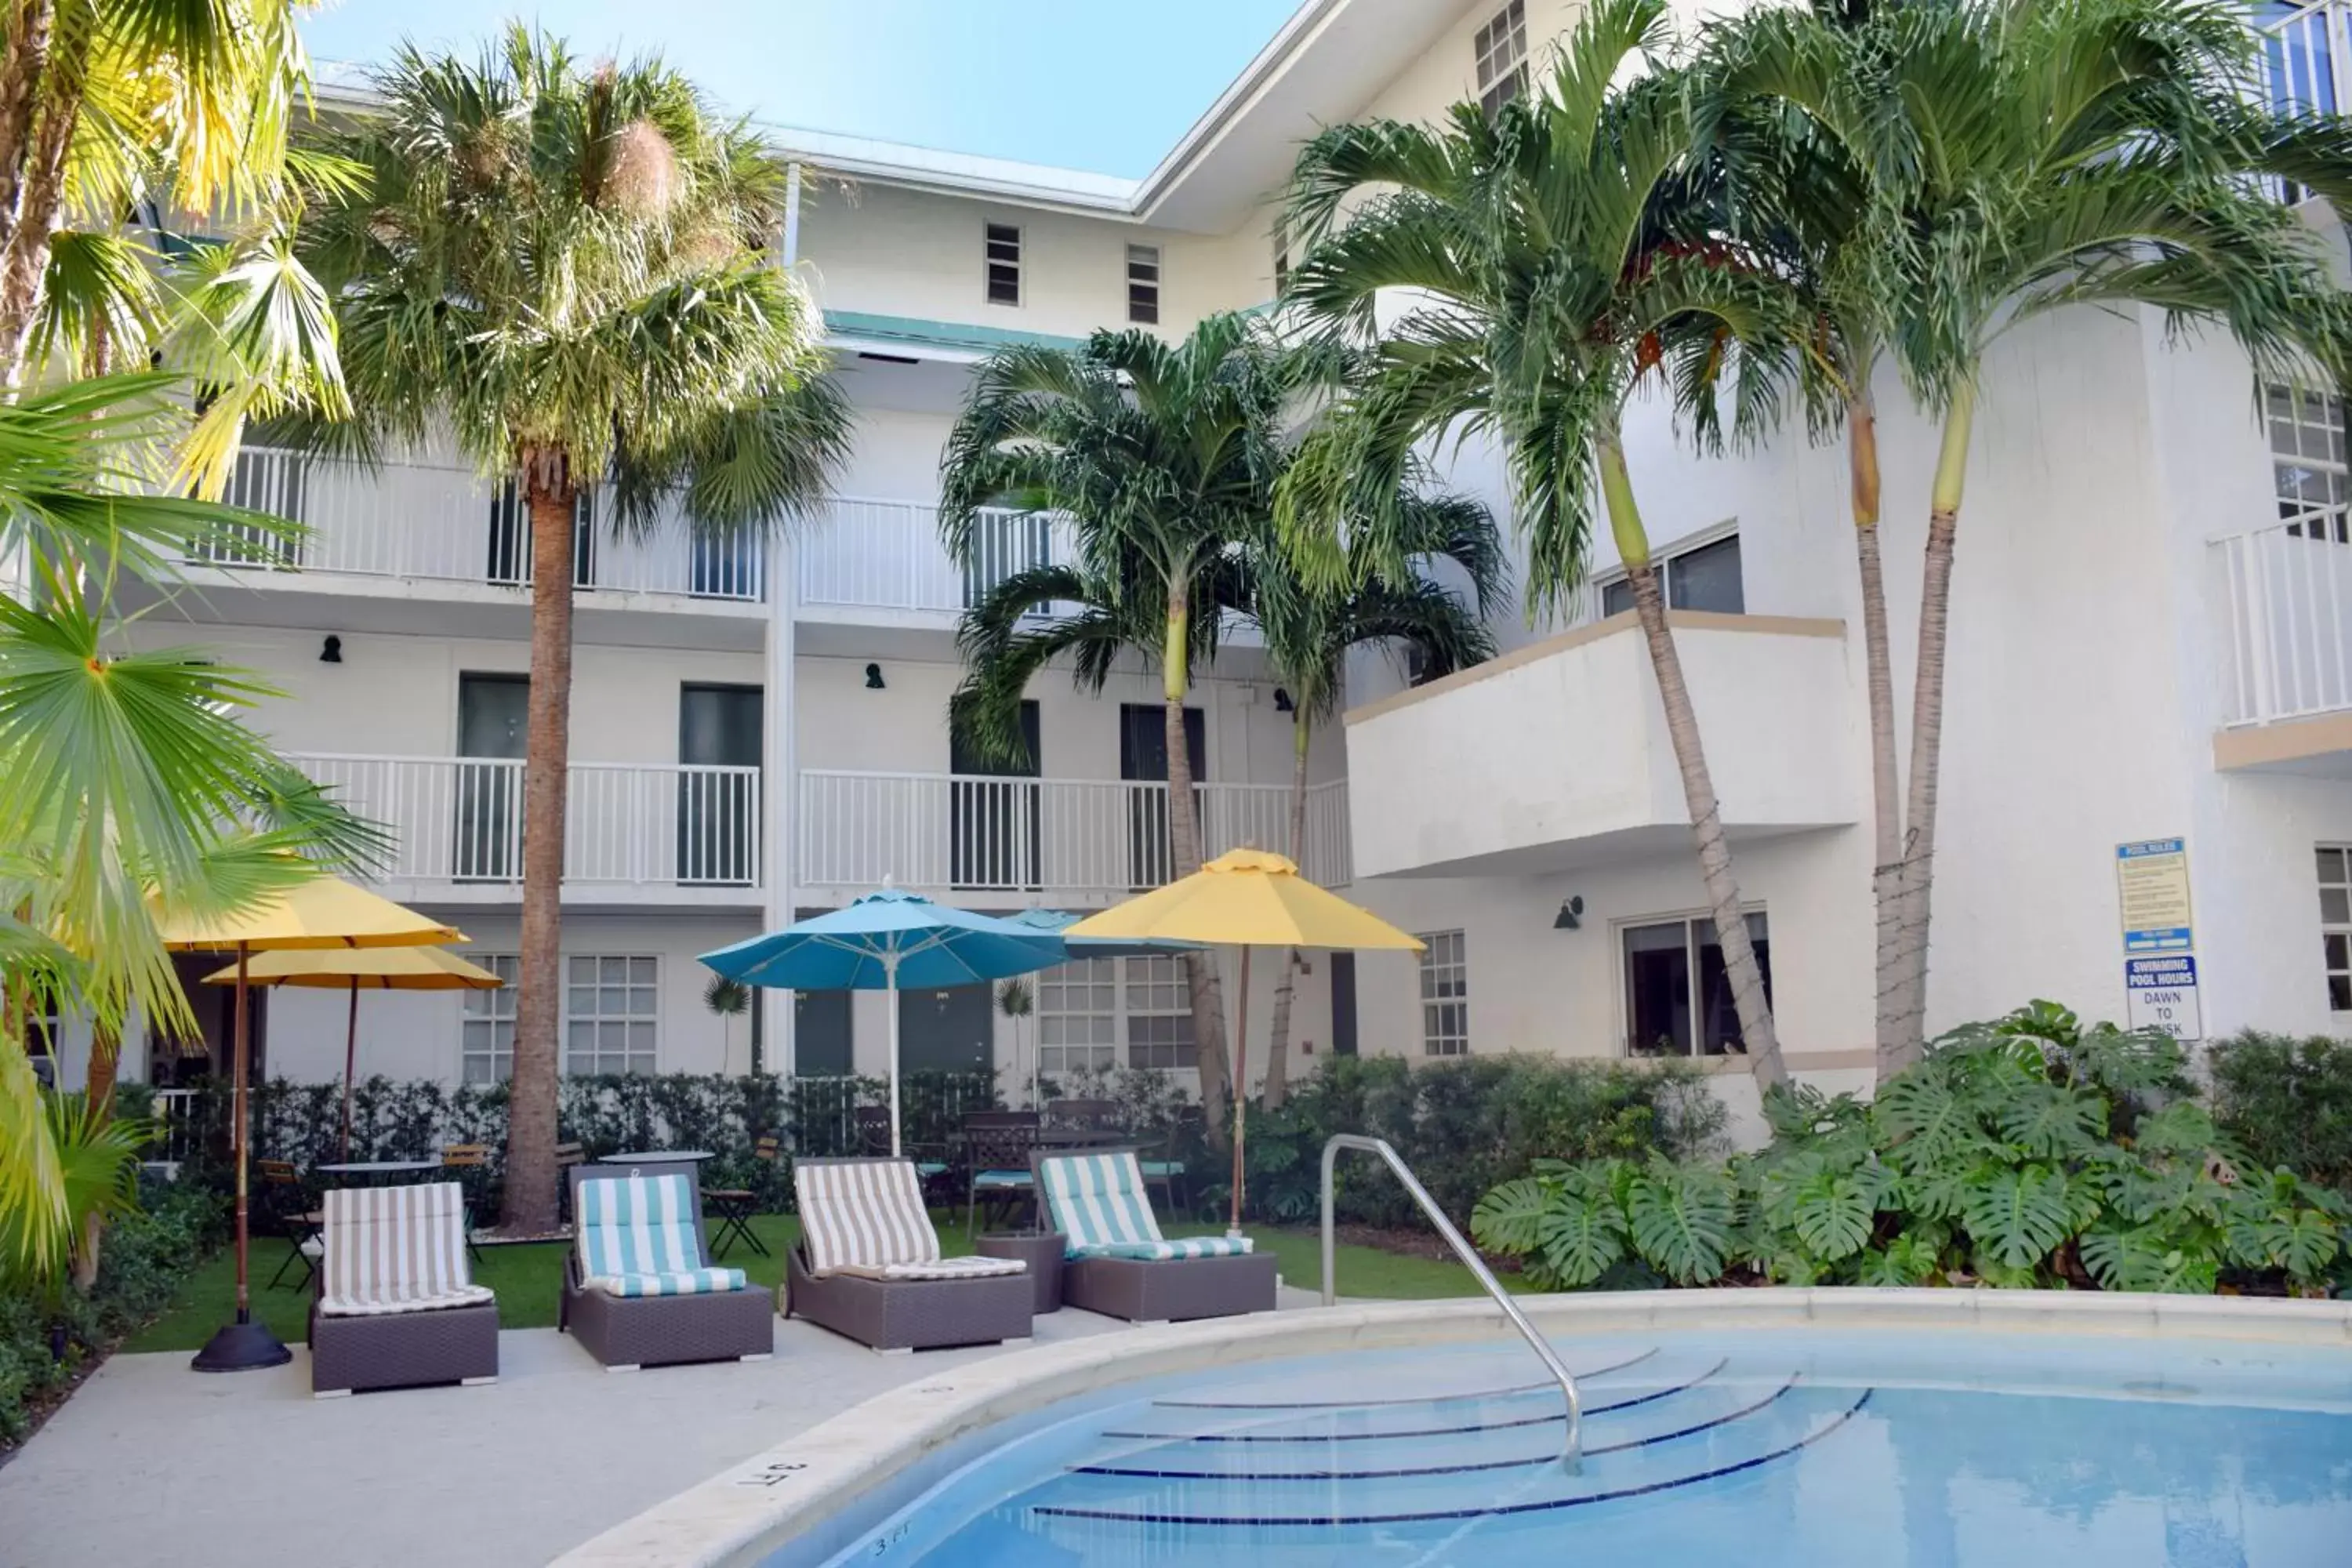 Patio, Swimming Pool in Coral Reef at Key Biscayne